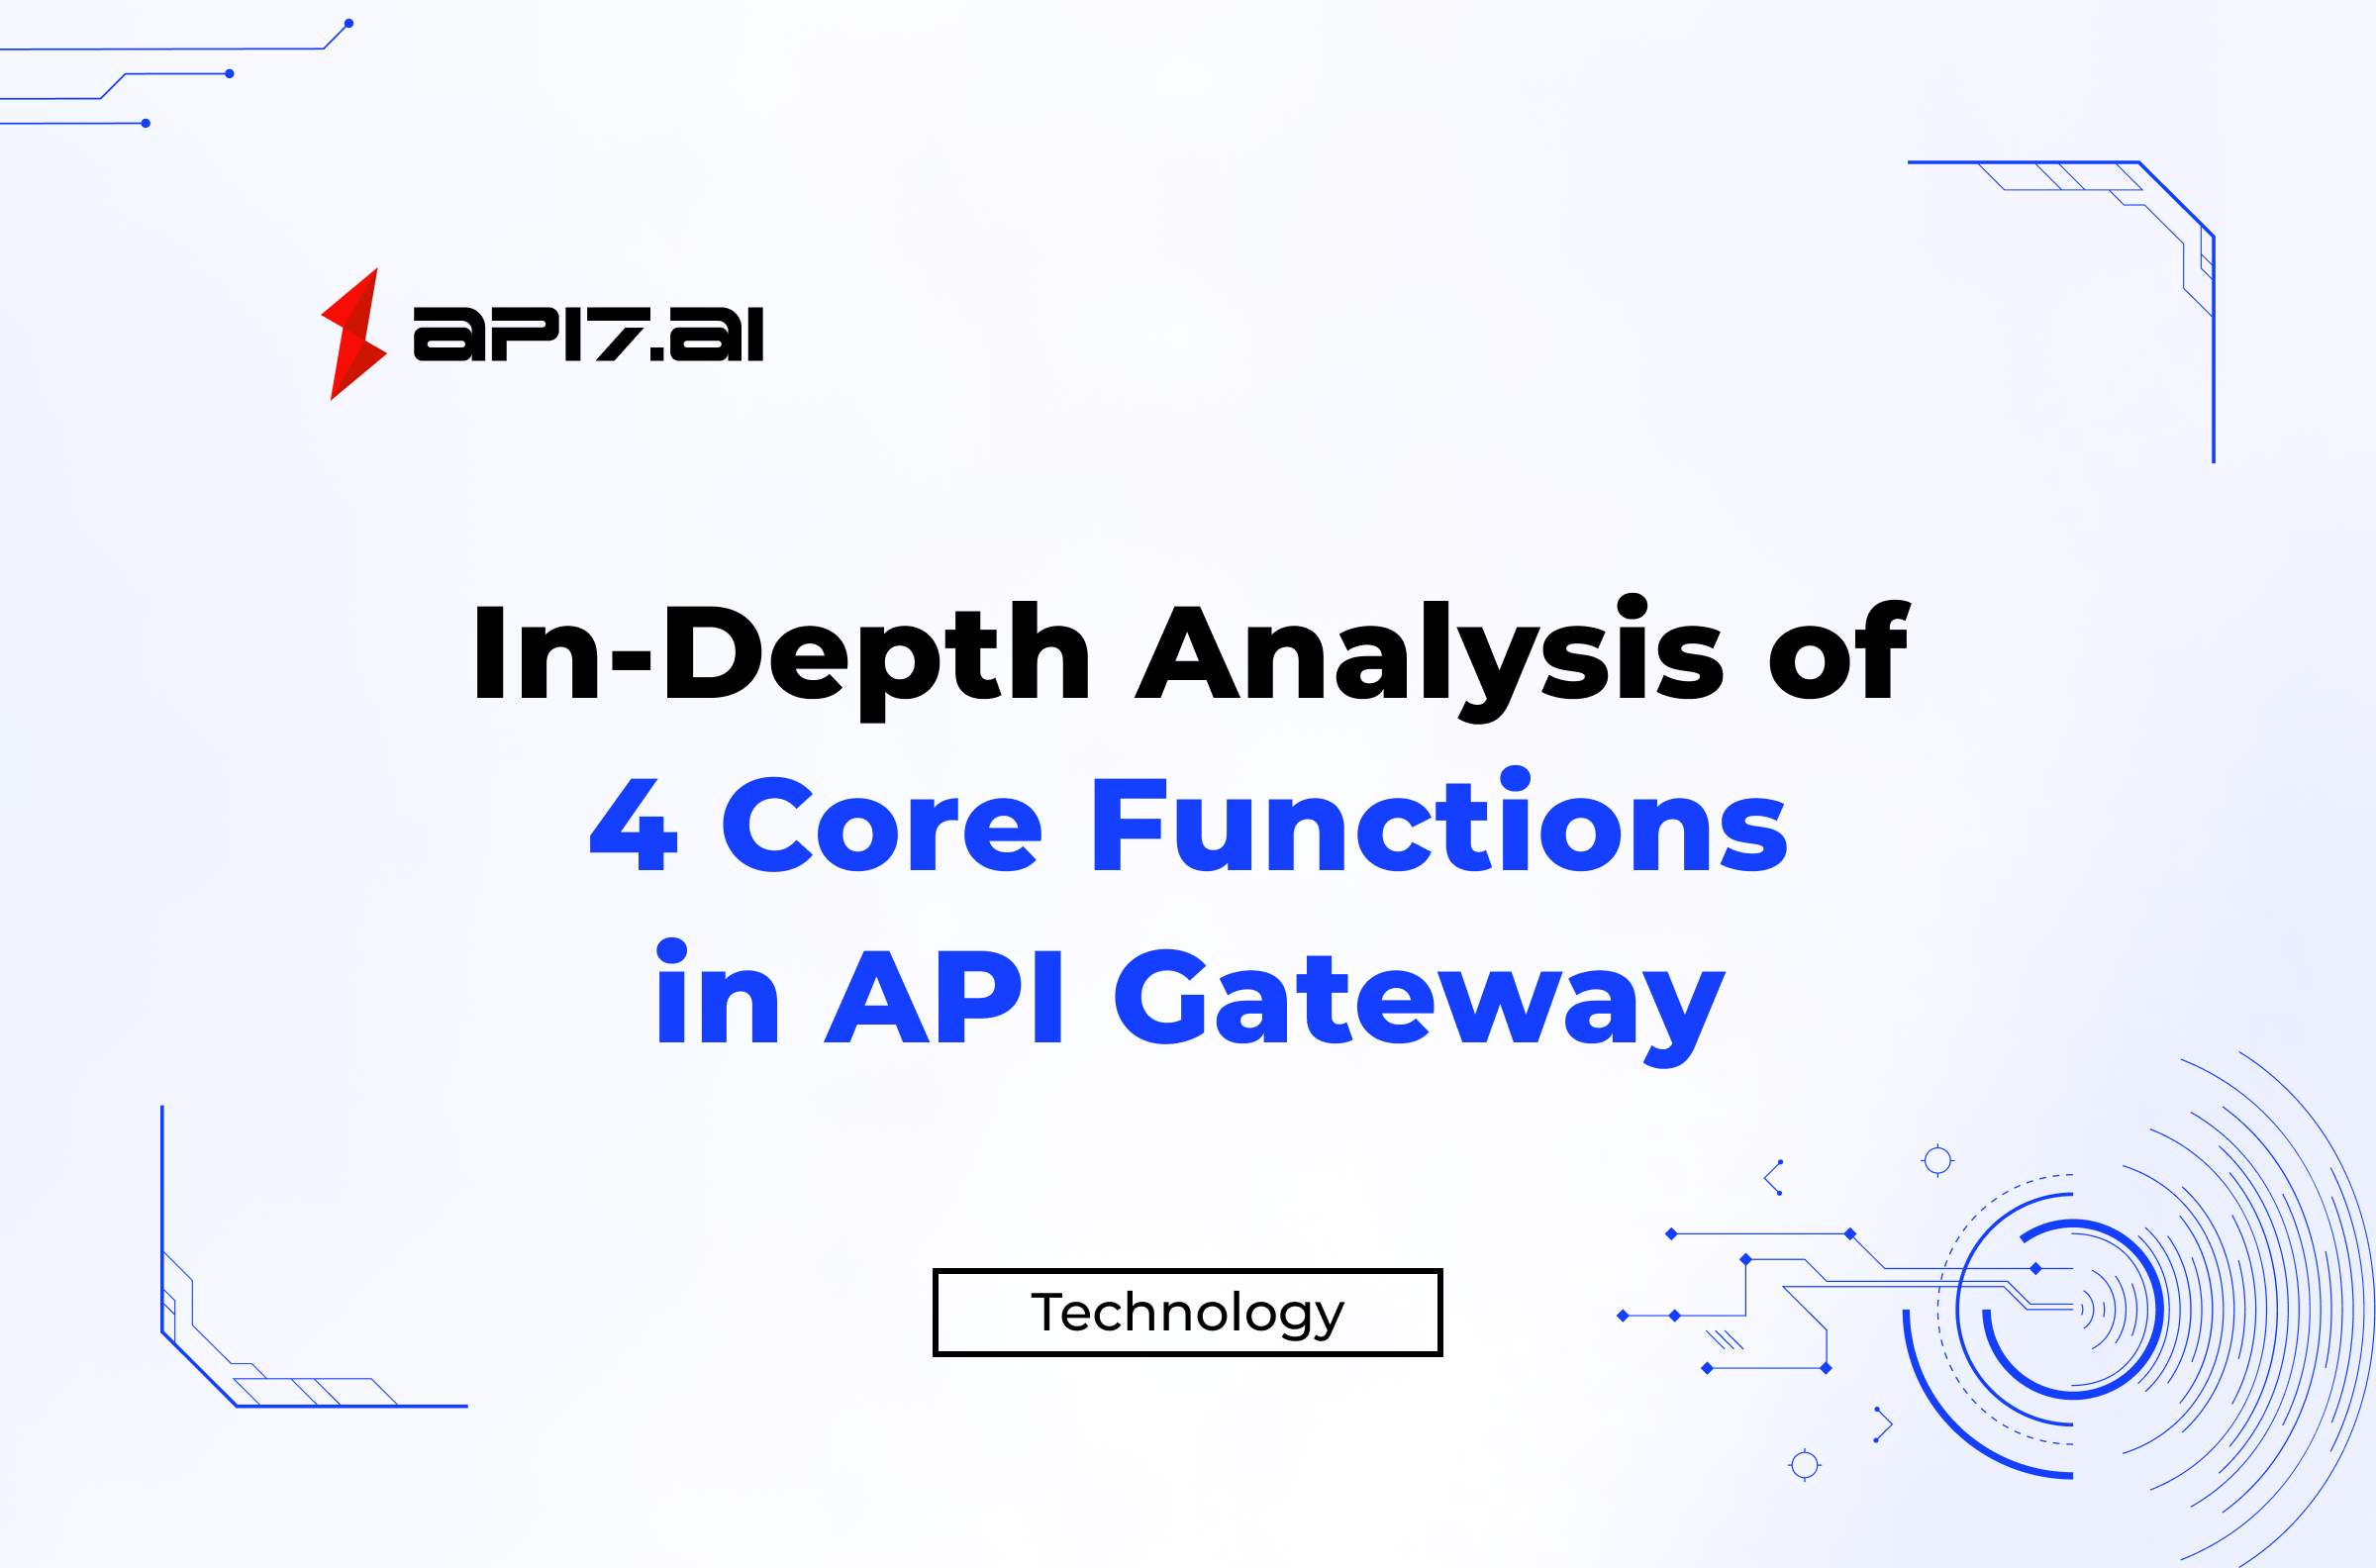 Four Core Functions of API Gateway: Connecting, Filtering, Governing and Integrating